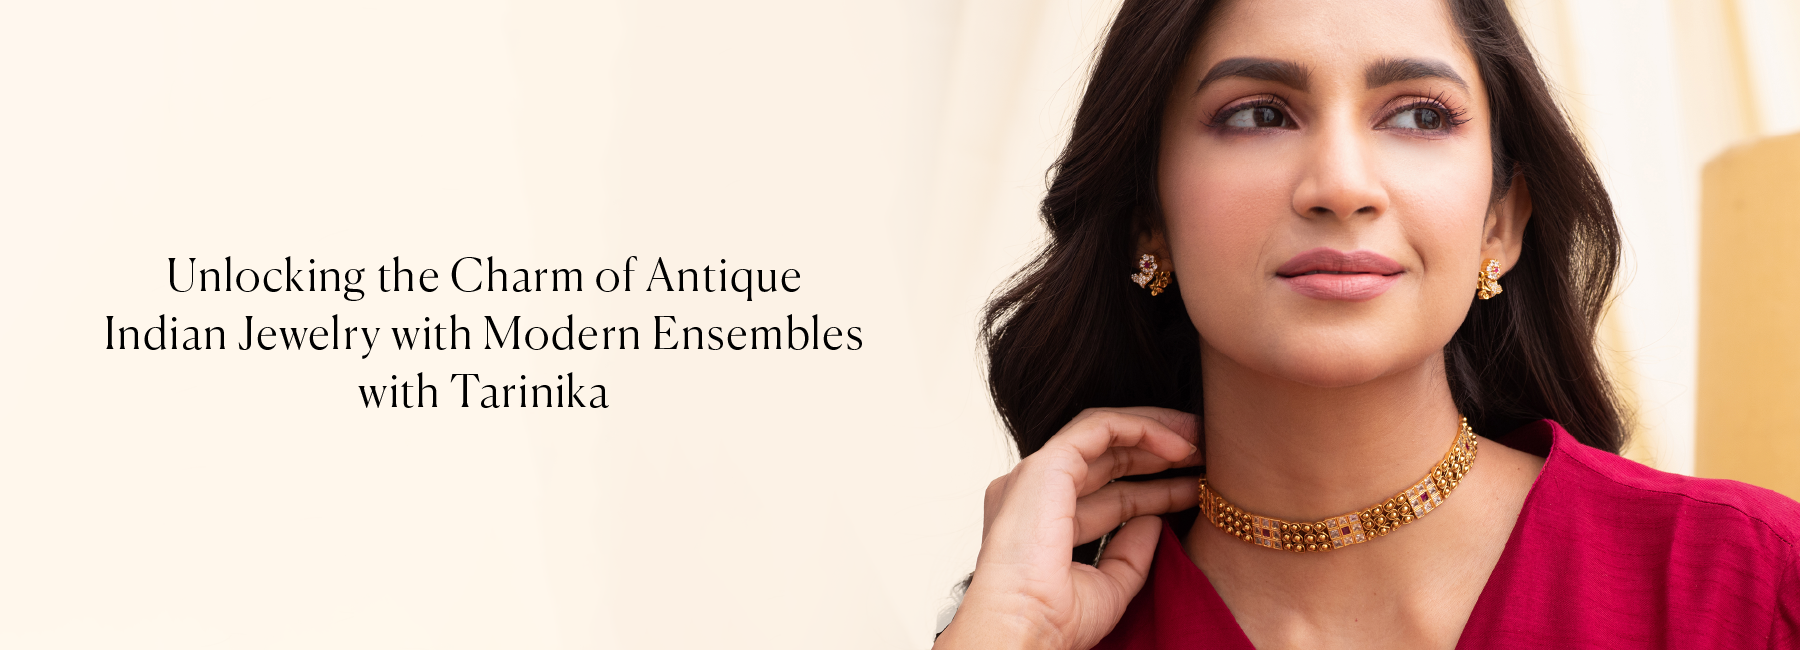 Unlocking the Charm of Antique Indian Jewelry with Modern Ensembles with Tarinika